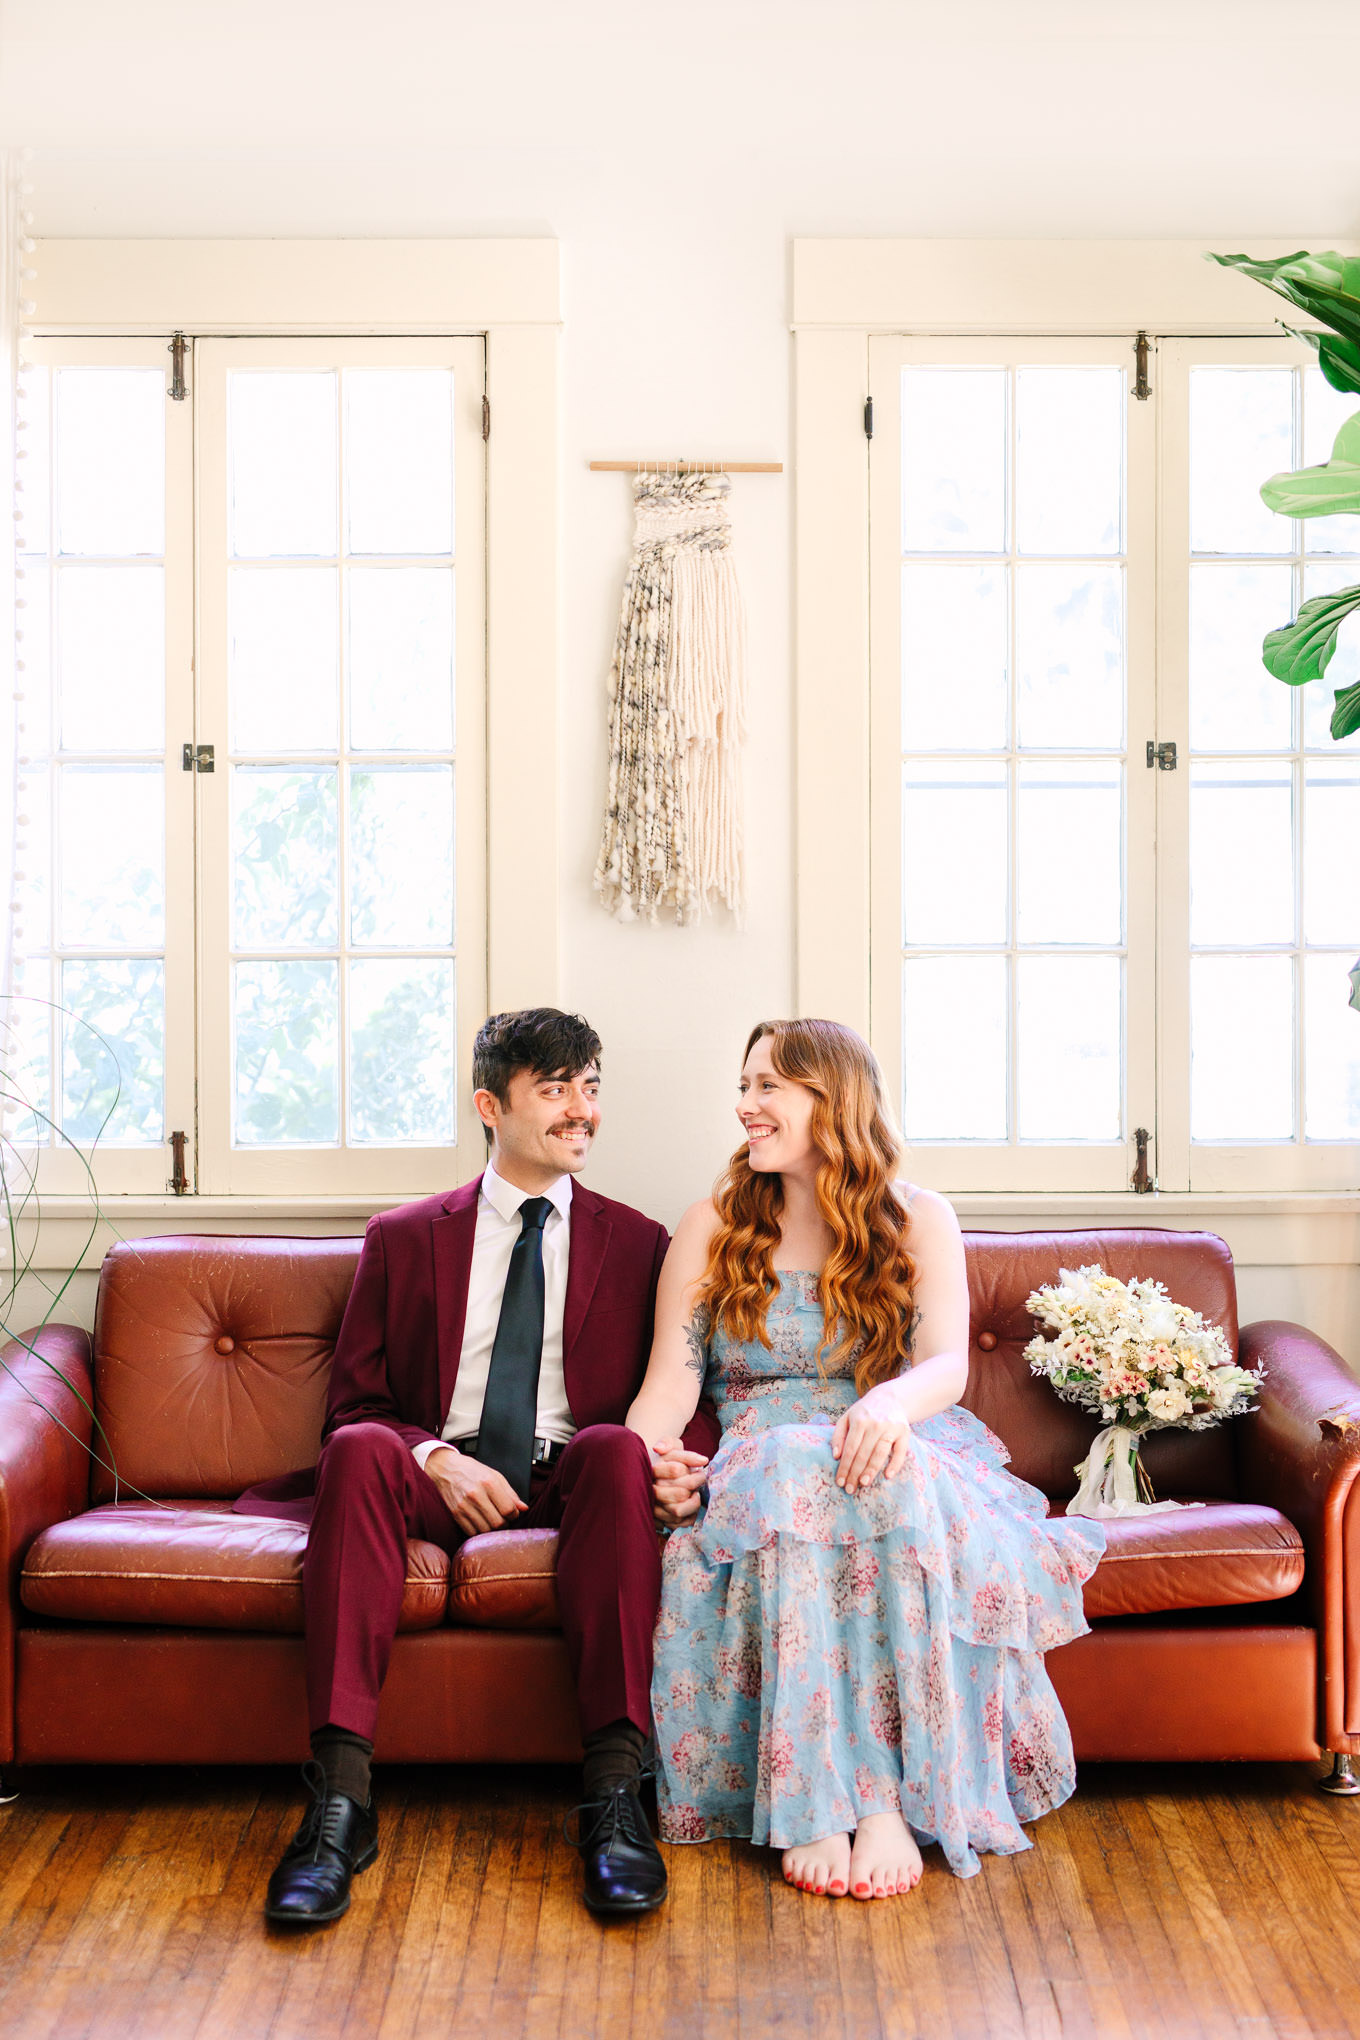 Engagement photos at home on the couch | Los Angeles Arboretum Elopement | Colorful and elevated wedding photography for fun-loving couples in Southern California | #LosAngelesElopement #elopement #LAarboretum #LAskyline #elopementphotos   Source: Mary Costa Photography | Los Angeles